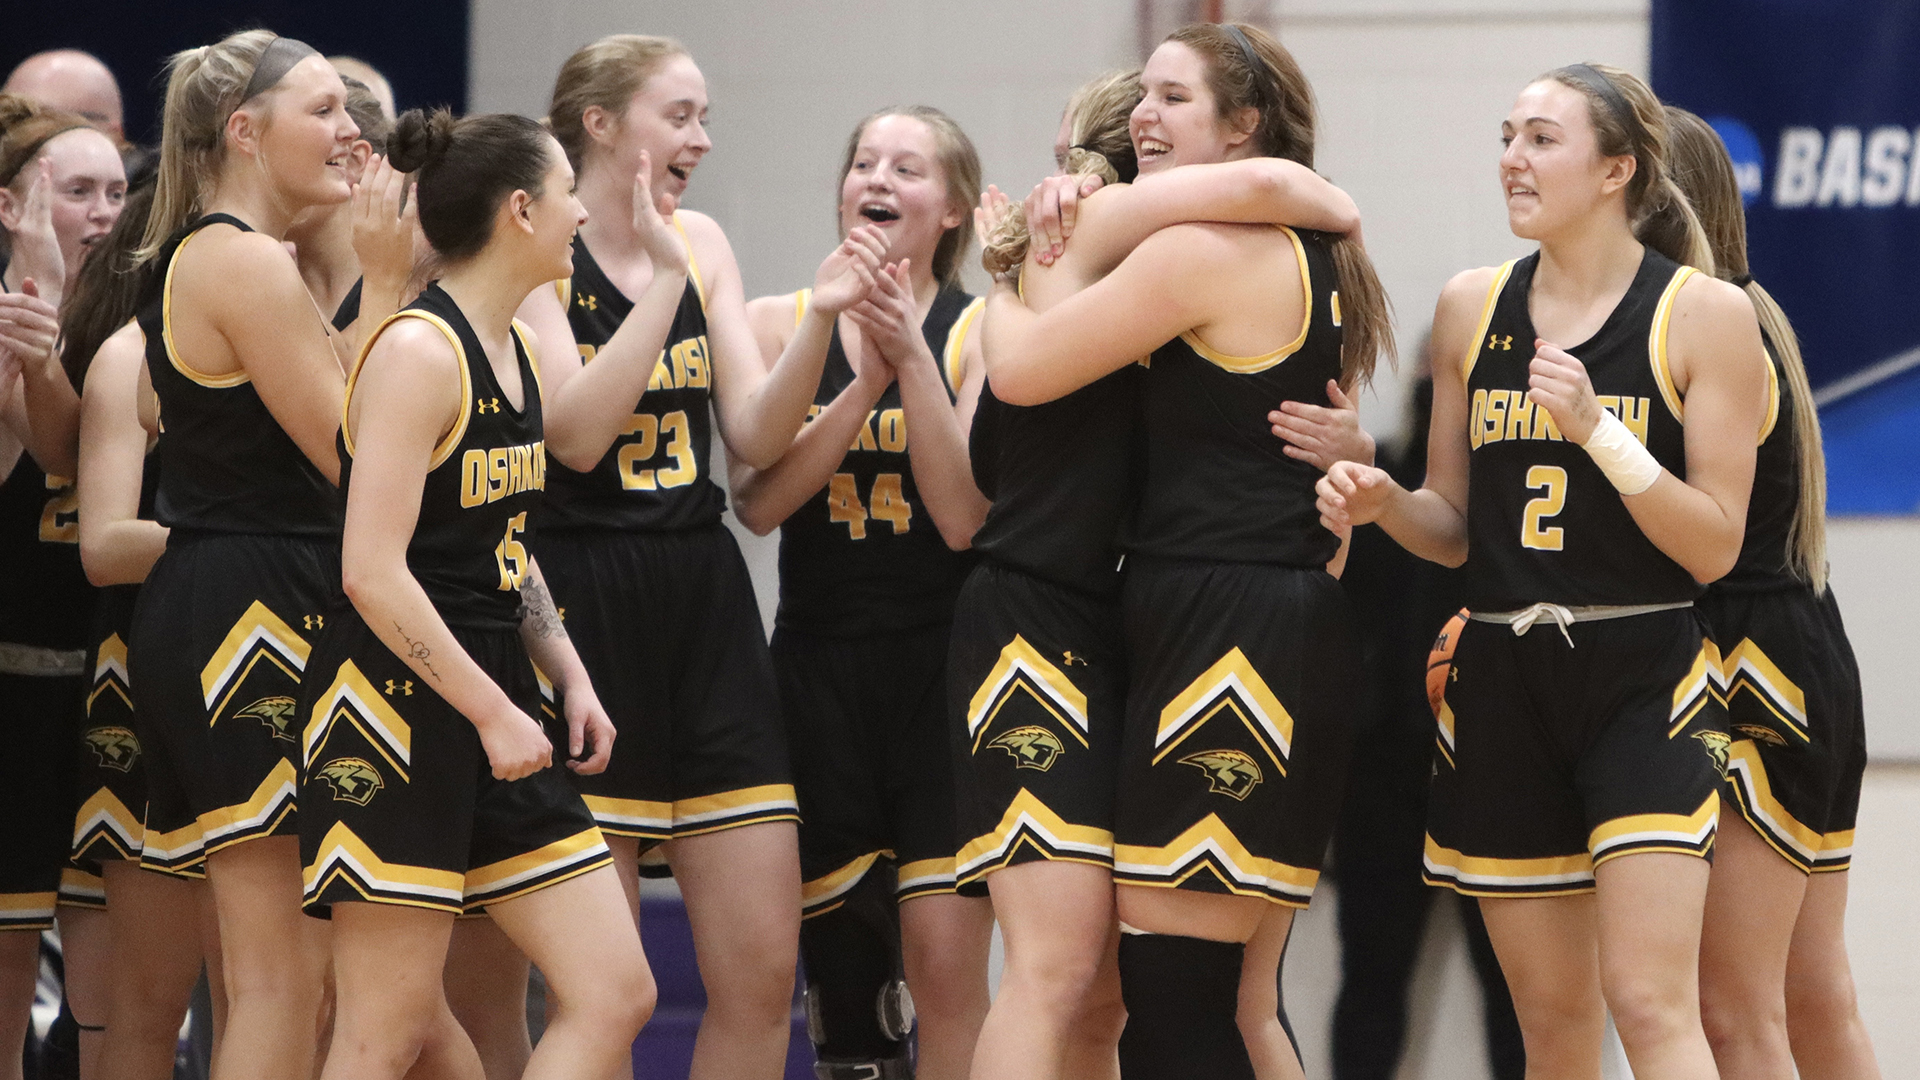 Titans Proceed To Elite Eight With Win Over Yellow Jackets